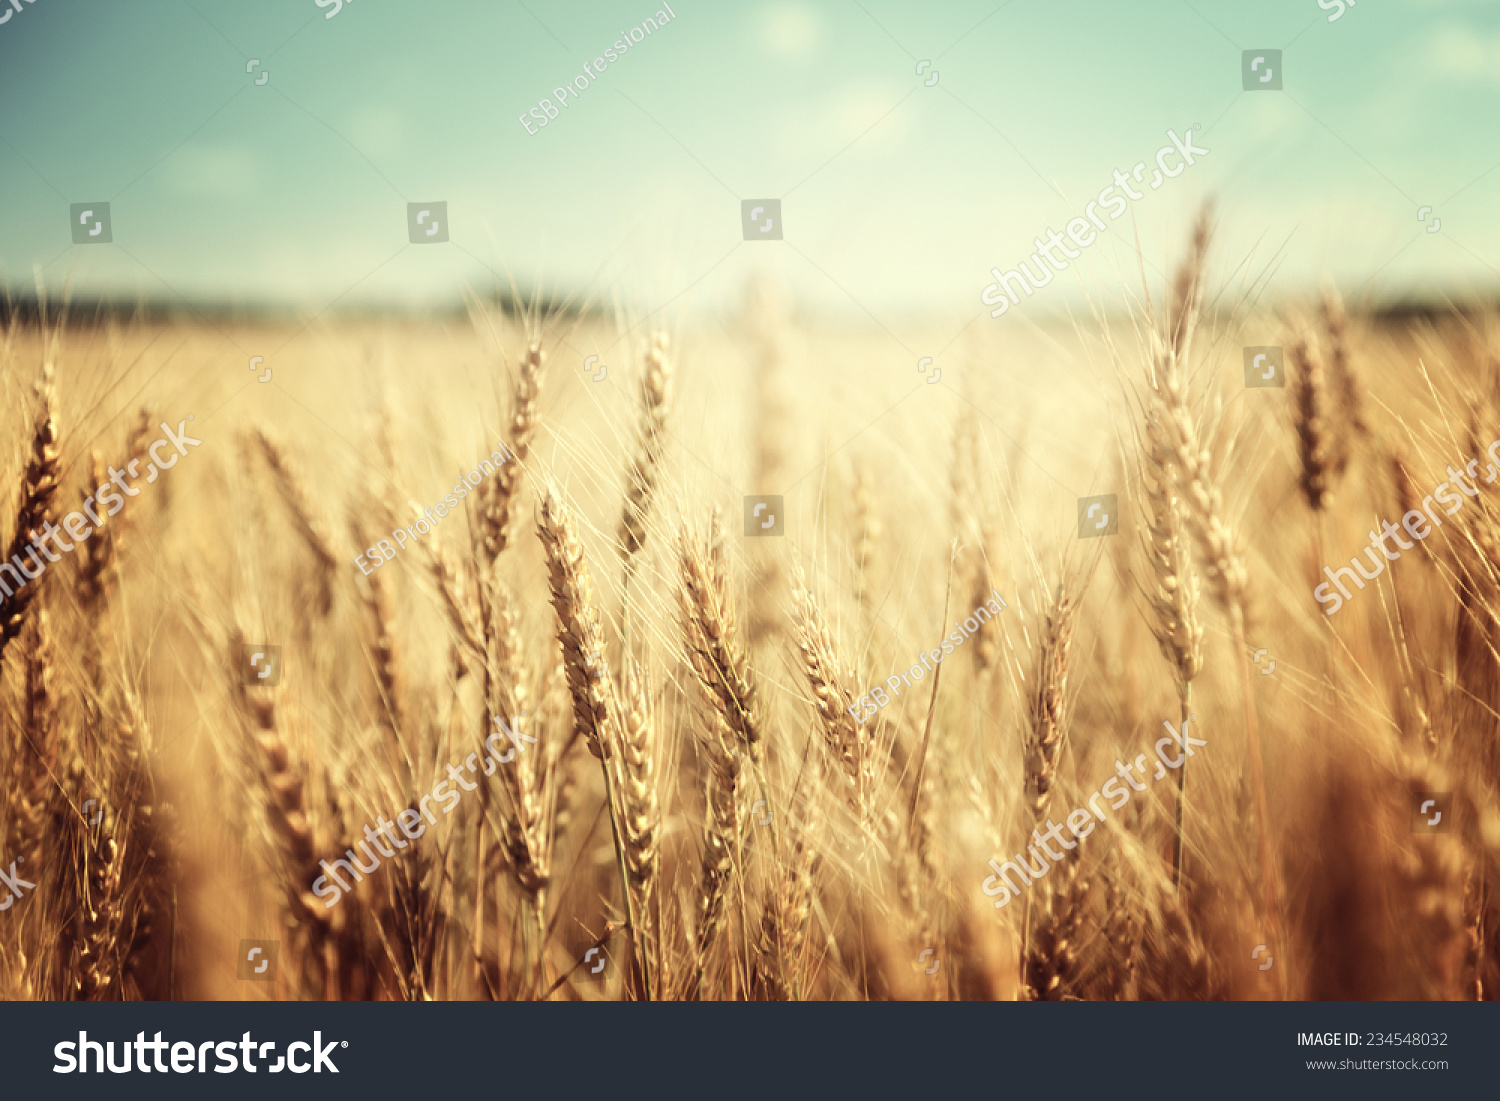 golden wheat field and sunny day #234548032